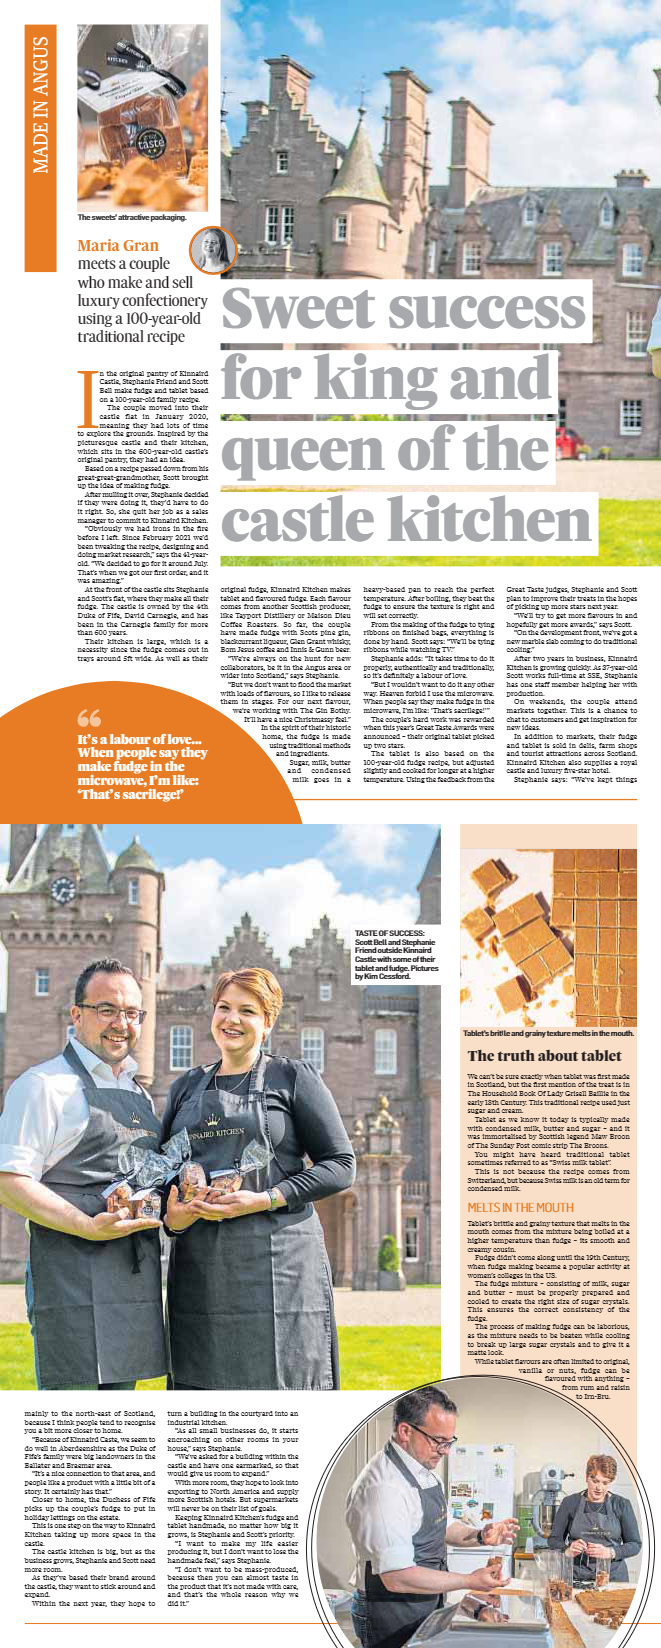 Sweet success for king and queen of the castle kitchen